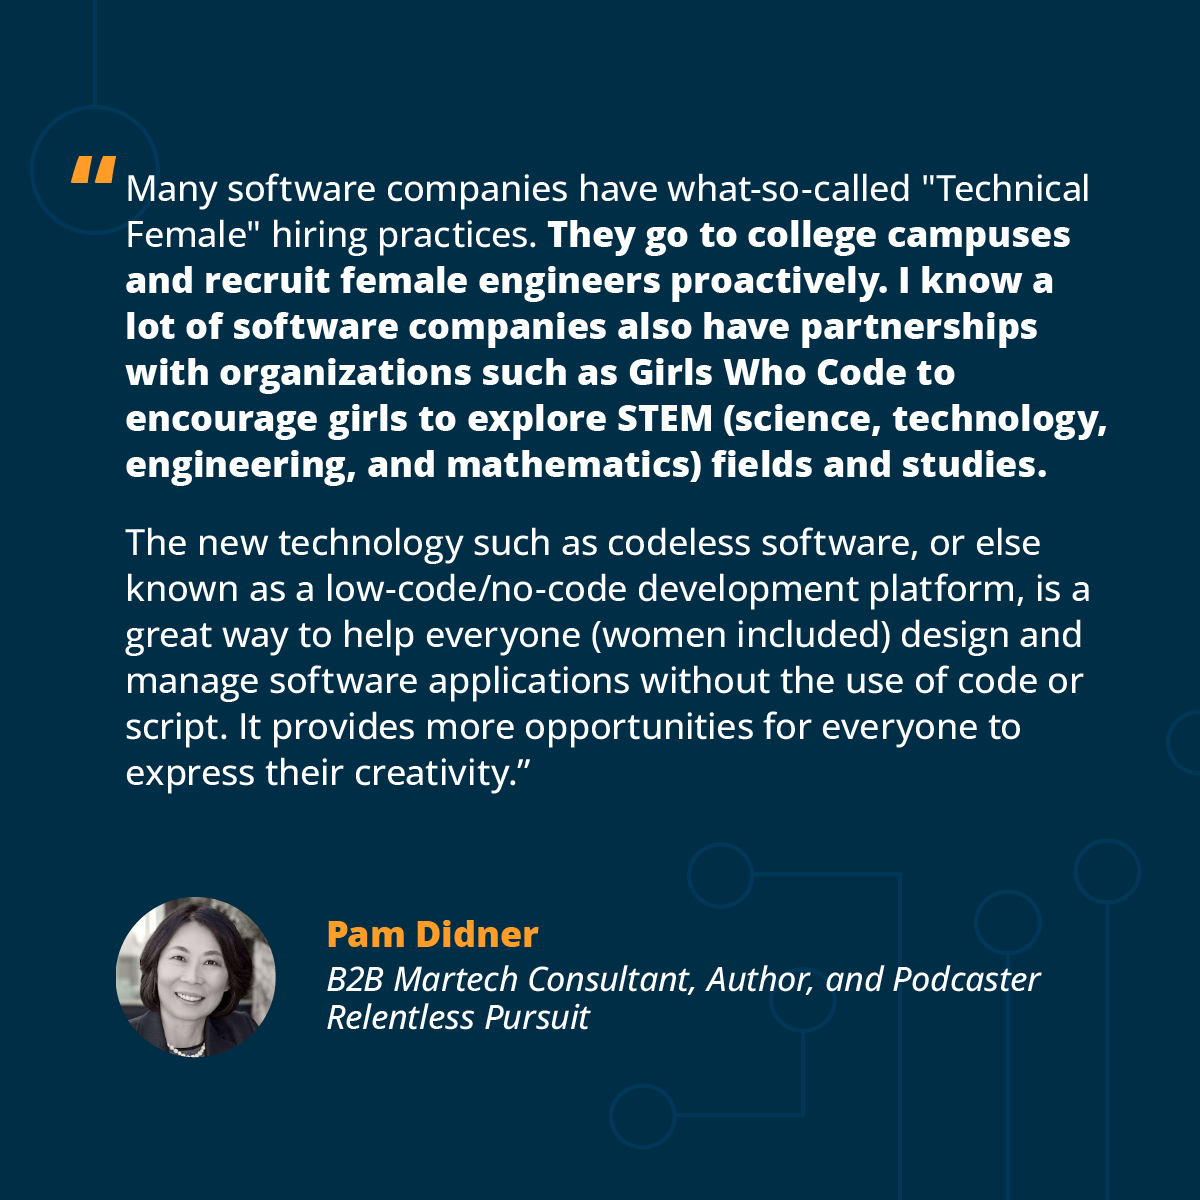 Pam Didner quote for the blog article "4 Ways Software Has Promoted Workplace Equity for Women"